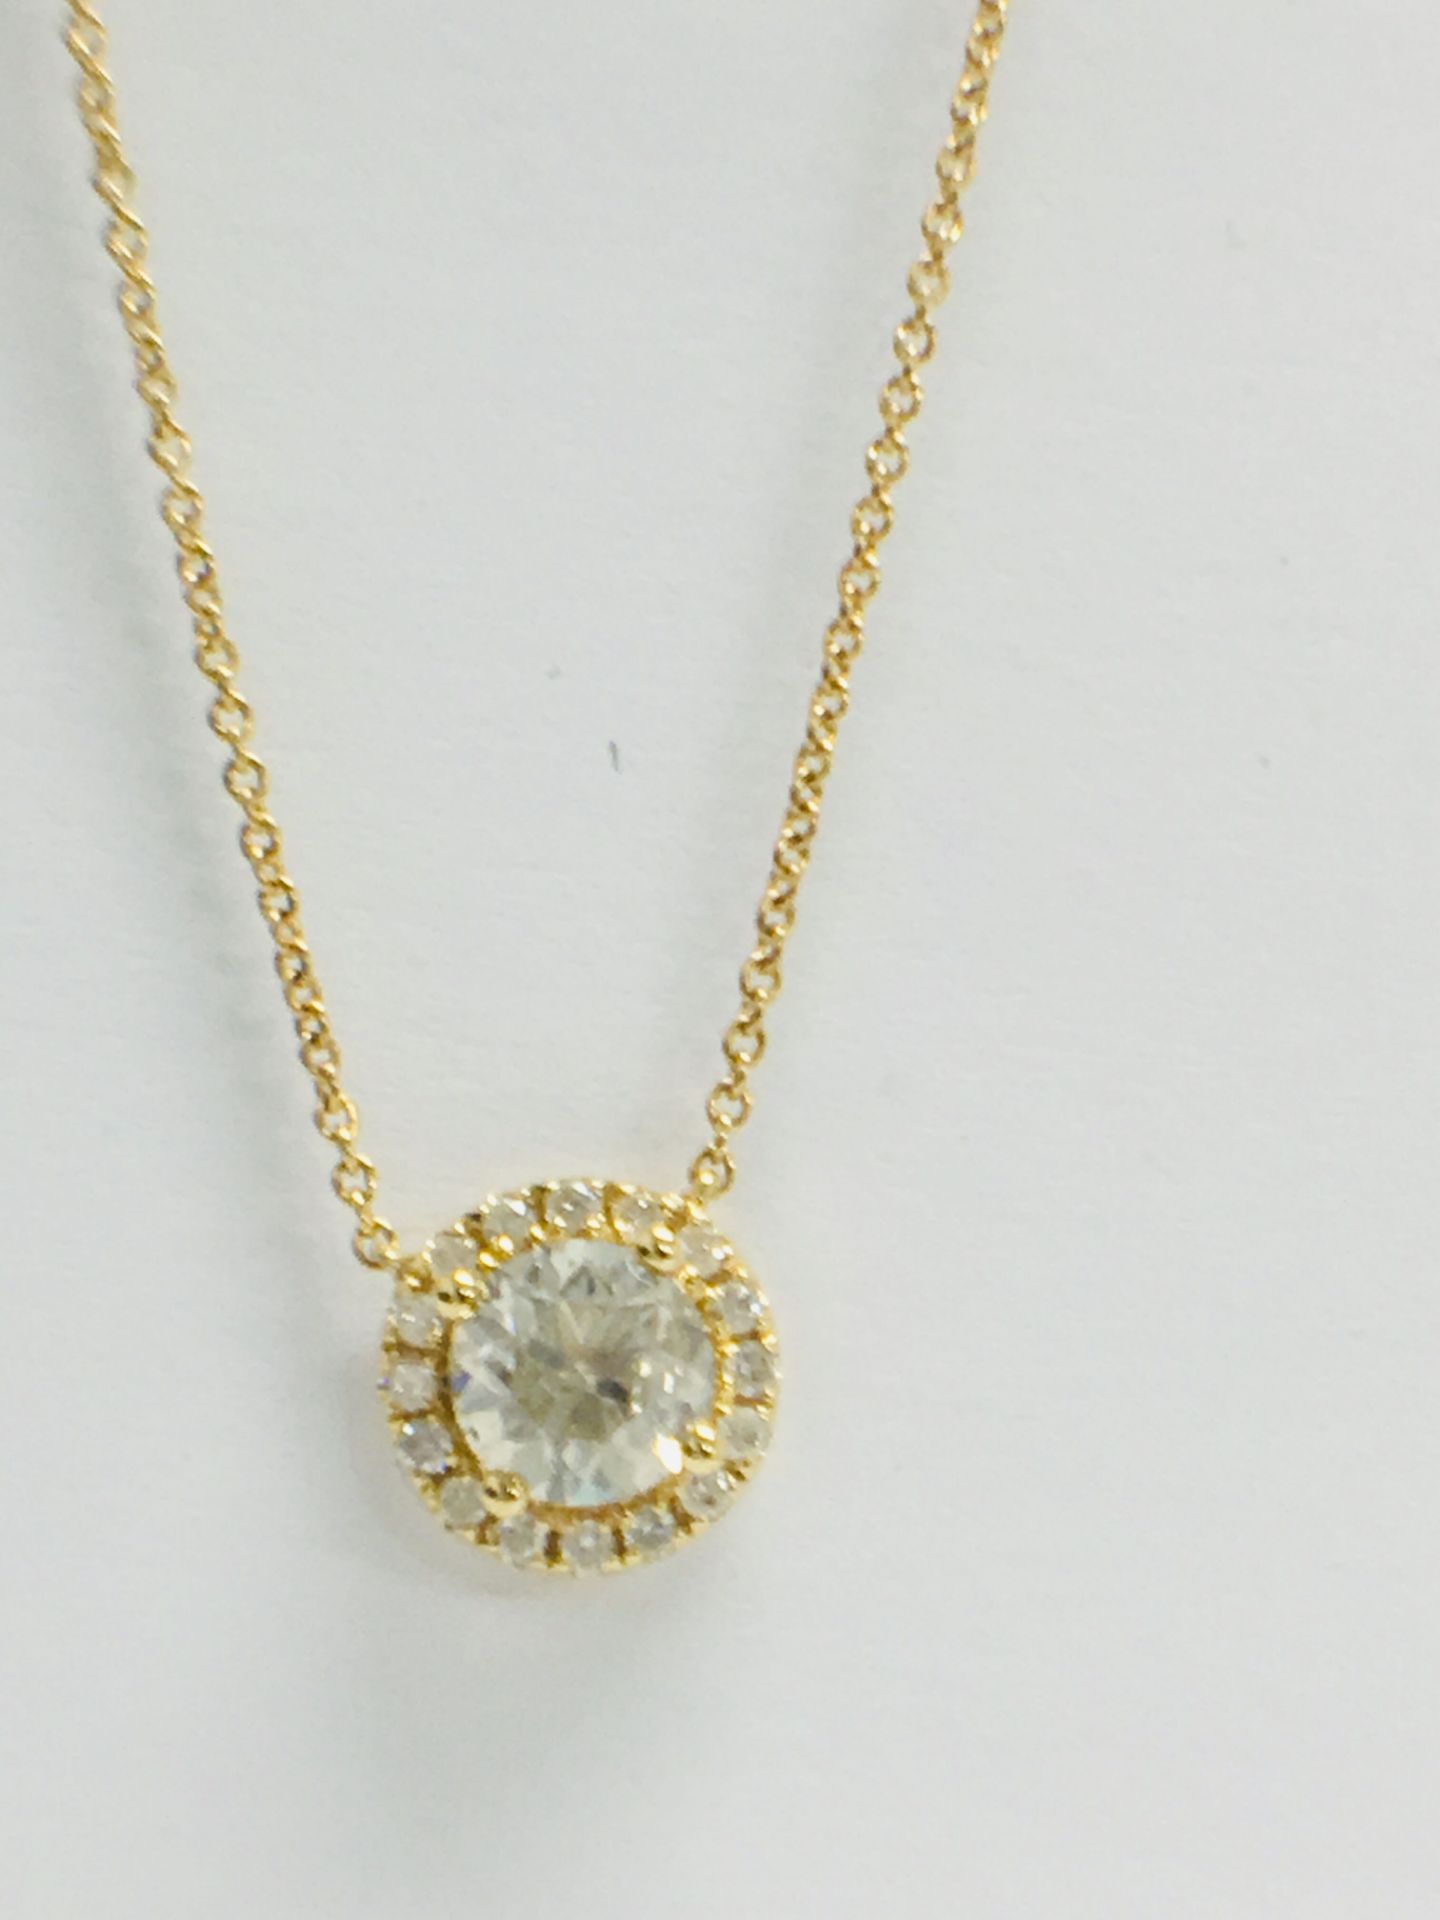 18ct Yellow Gold Diamond Necklace - Image 5 of 10